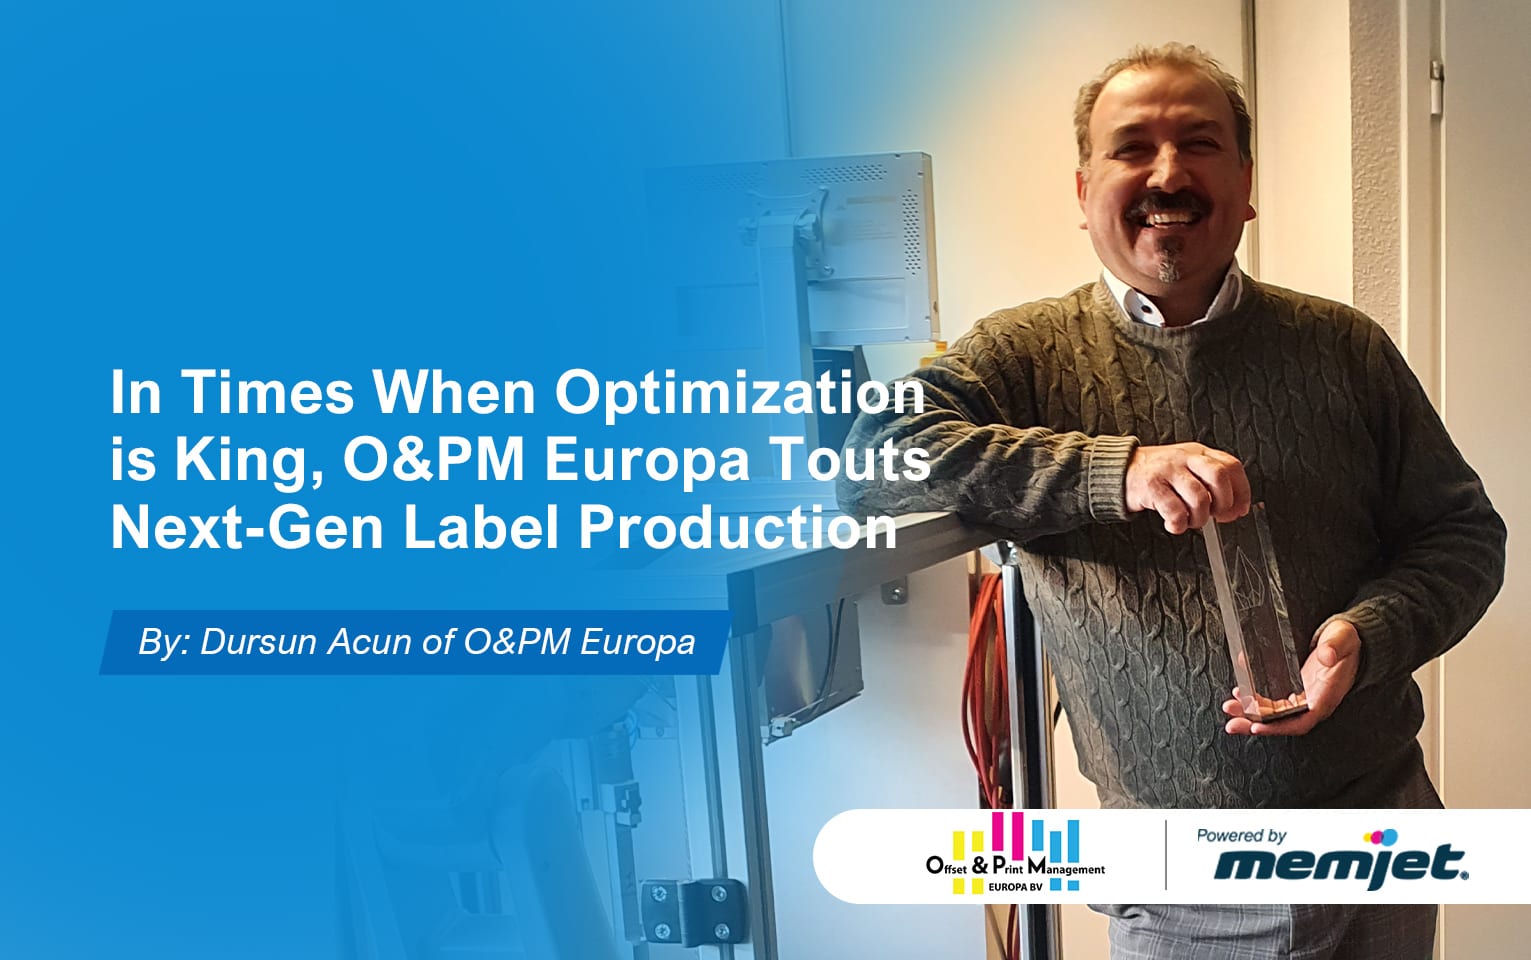 In Times When Optimization is King, O&PM Europa Touts Next-Gen Label Production